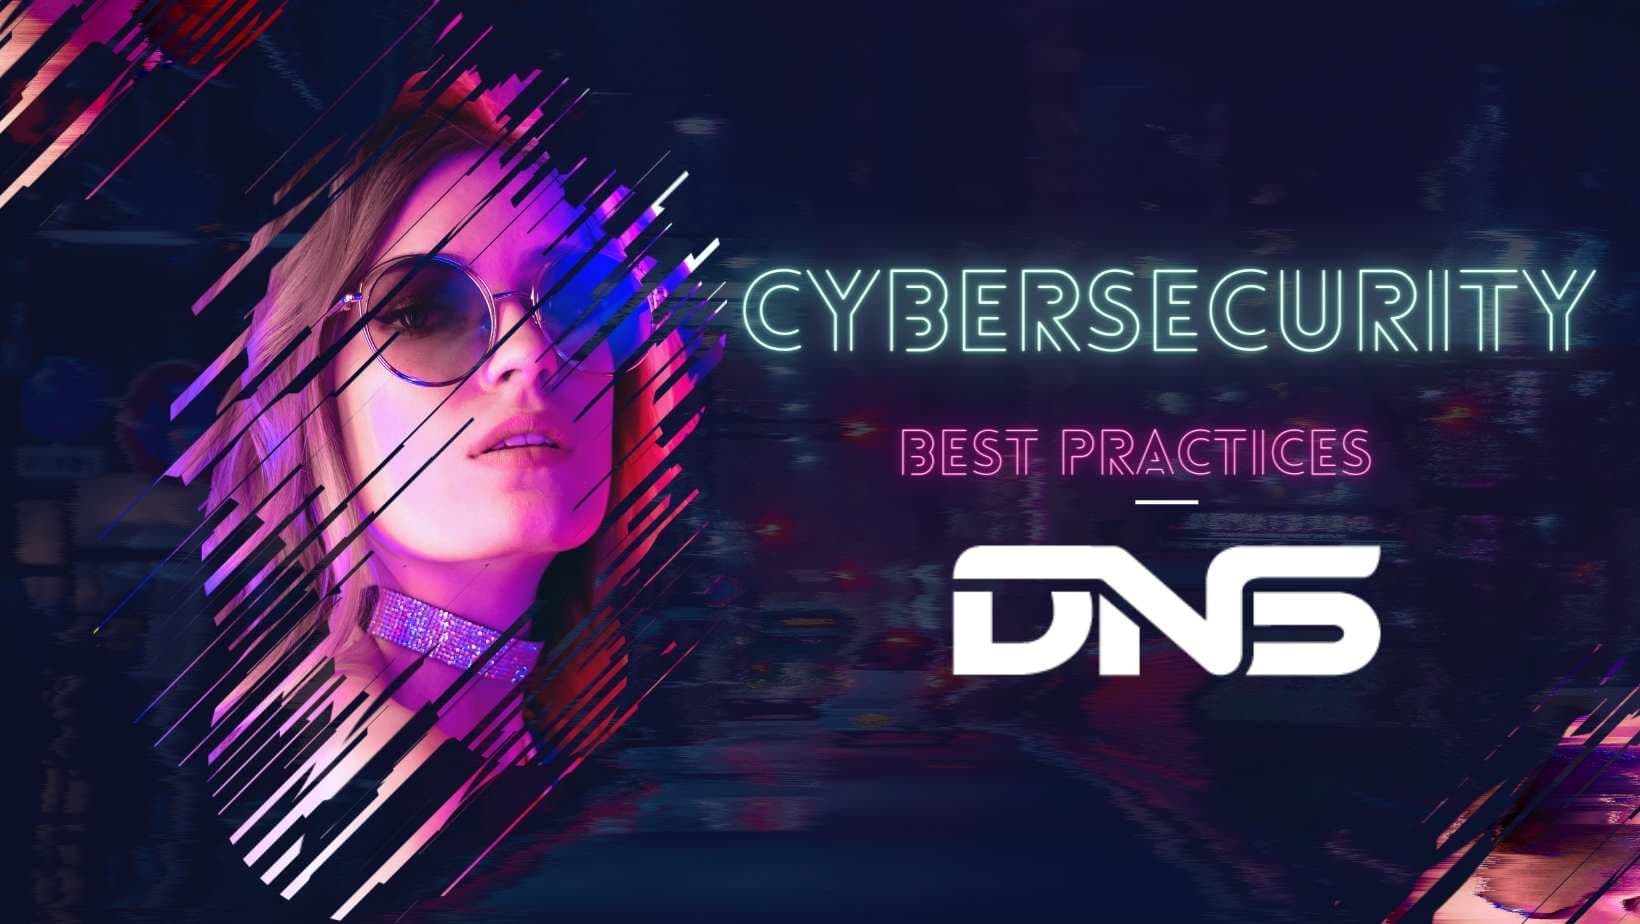 Cybersecurity best practices by DNSnetworks